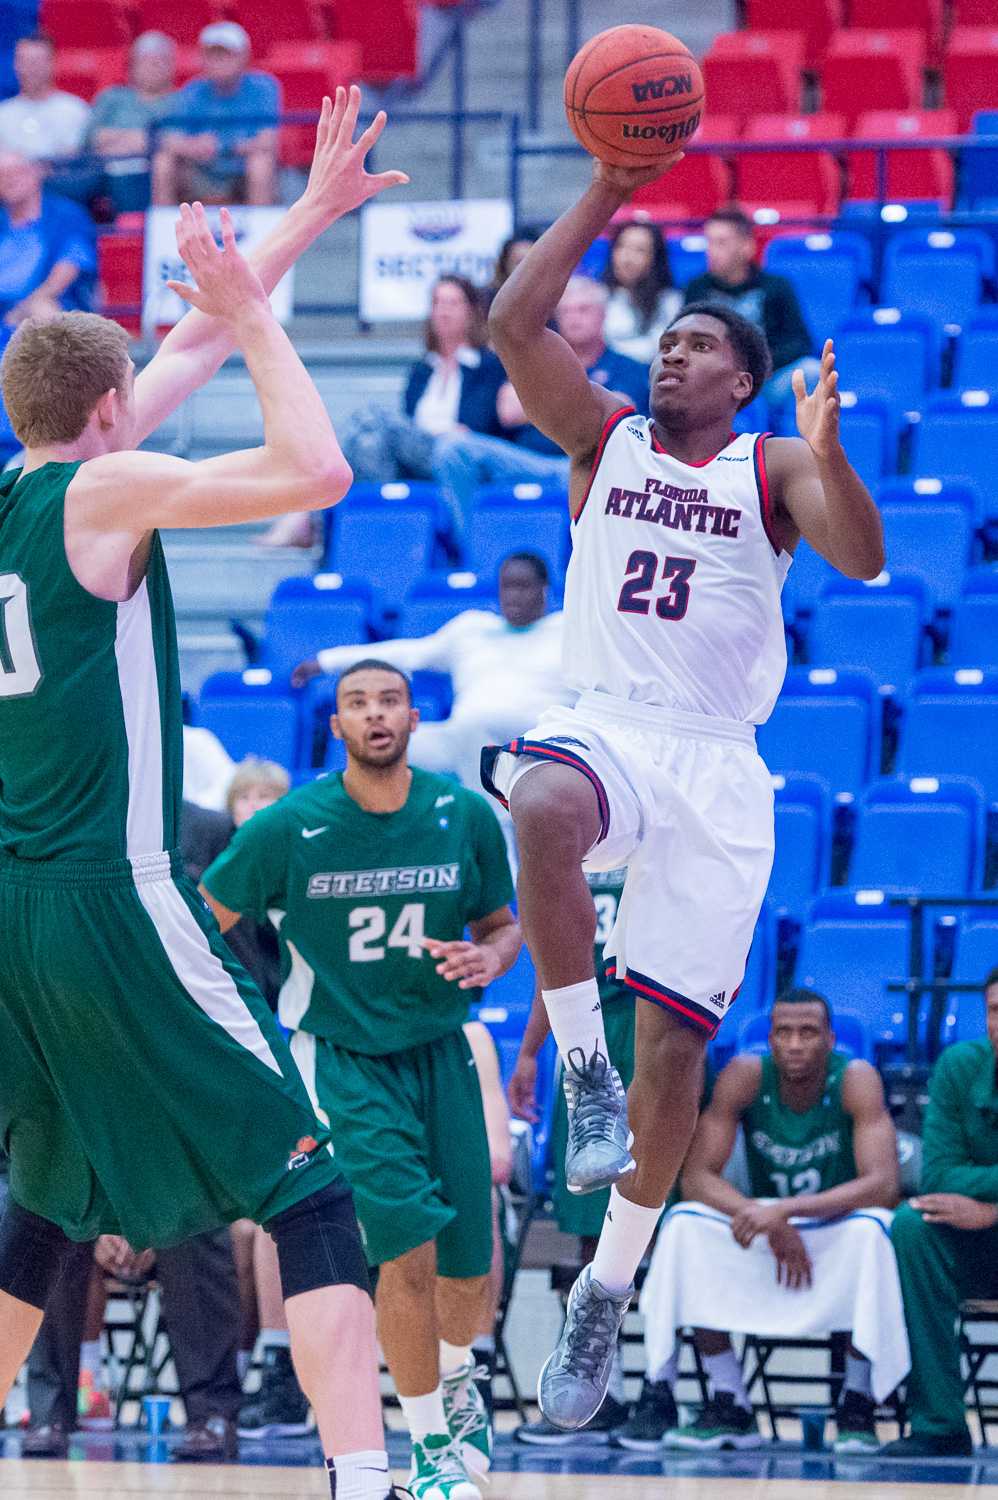 FAU guard Solomon Poole attempts a shot in his first minutes of play as an Owl. Poole scored a game-high 23 points in the Owls’ 79-69 win over Stetson on Dec. 16. 